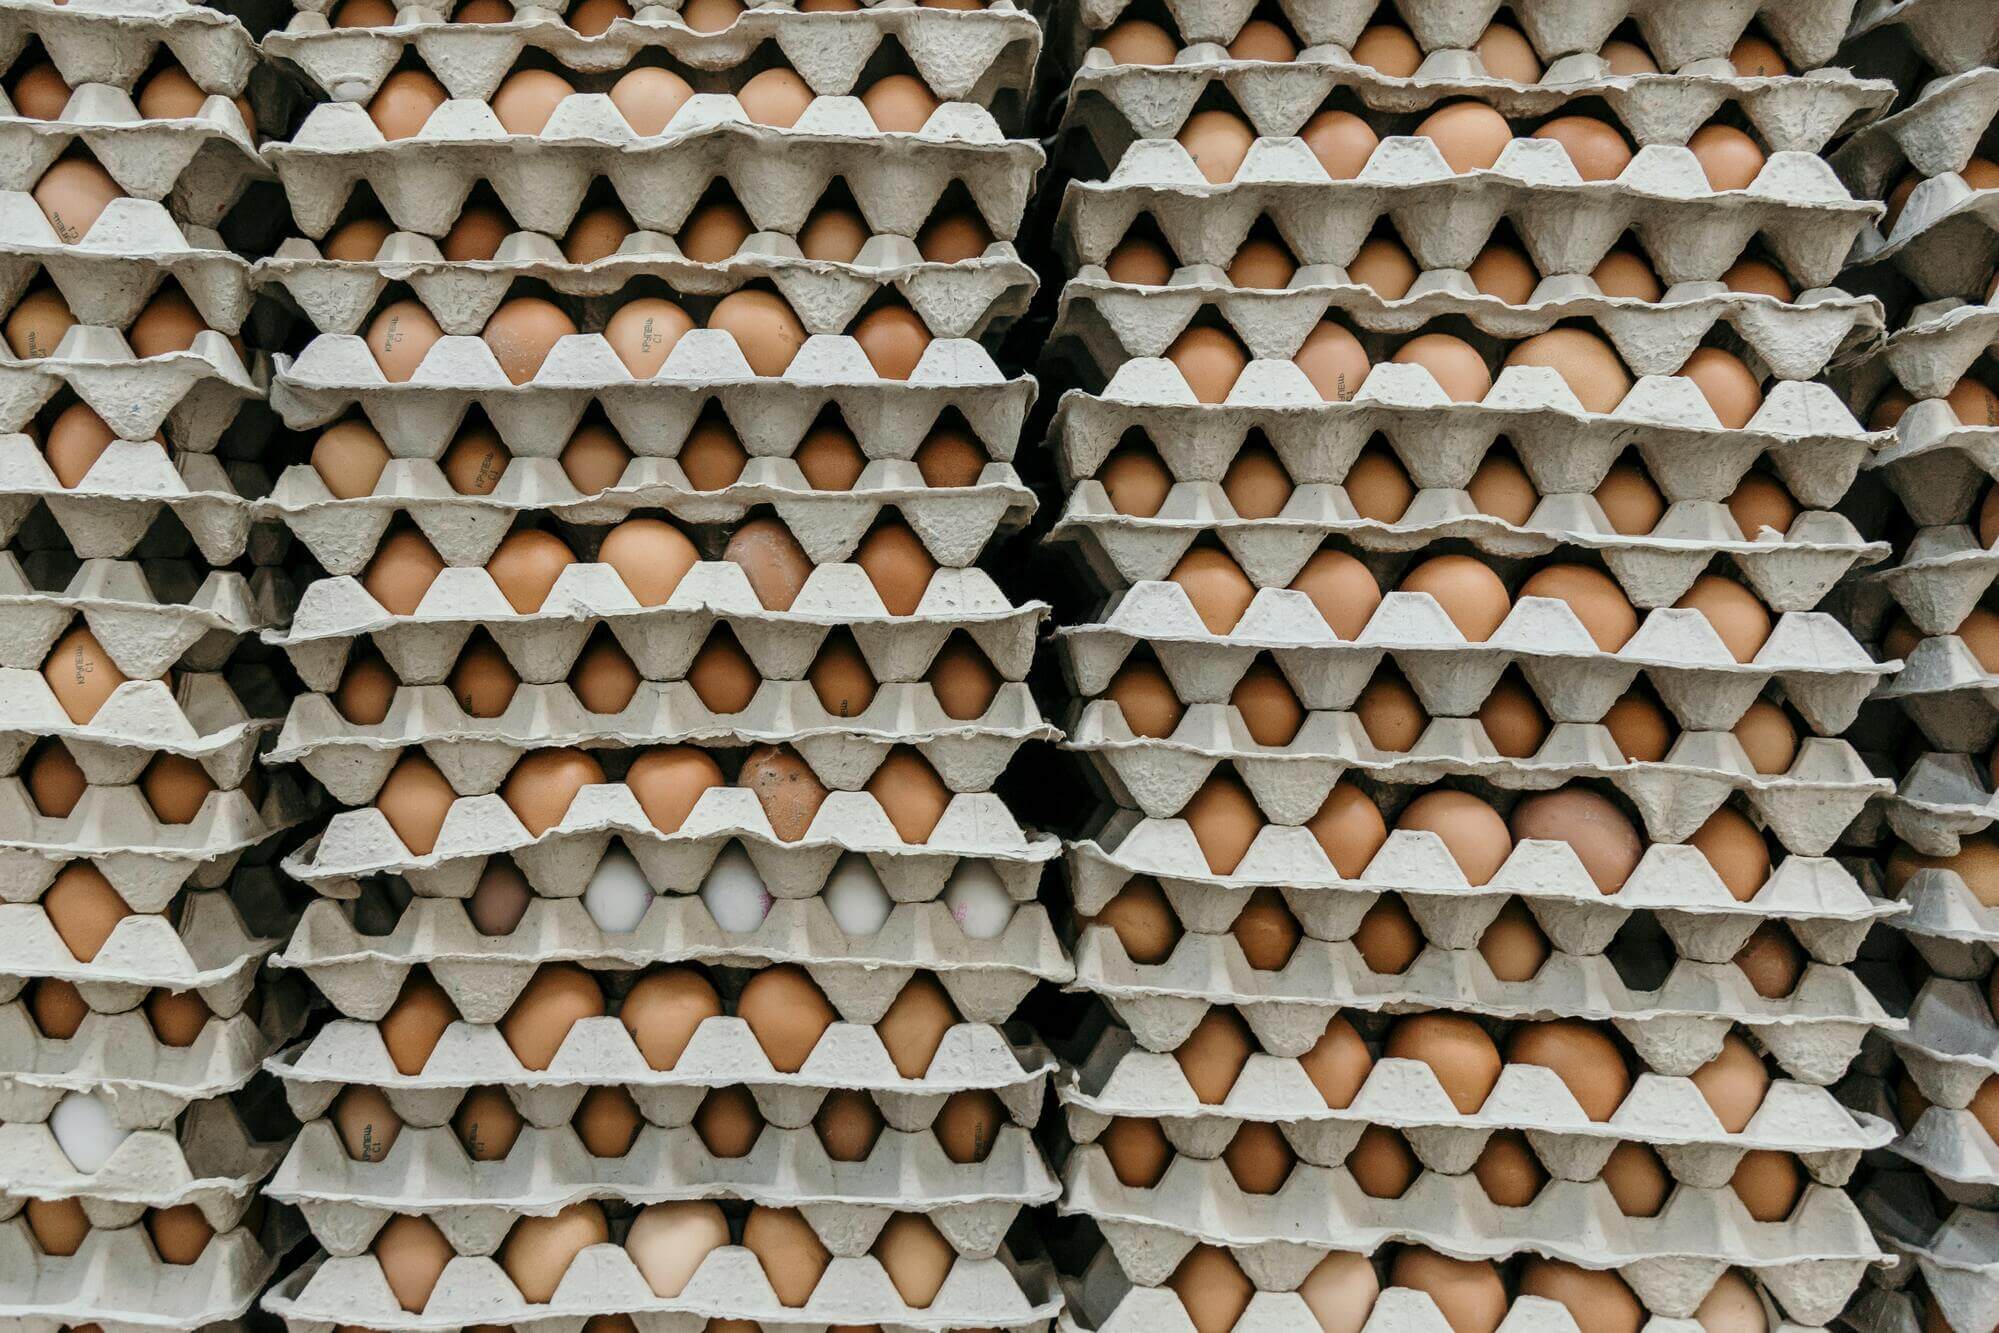 Why are egg prices so high right now?